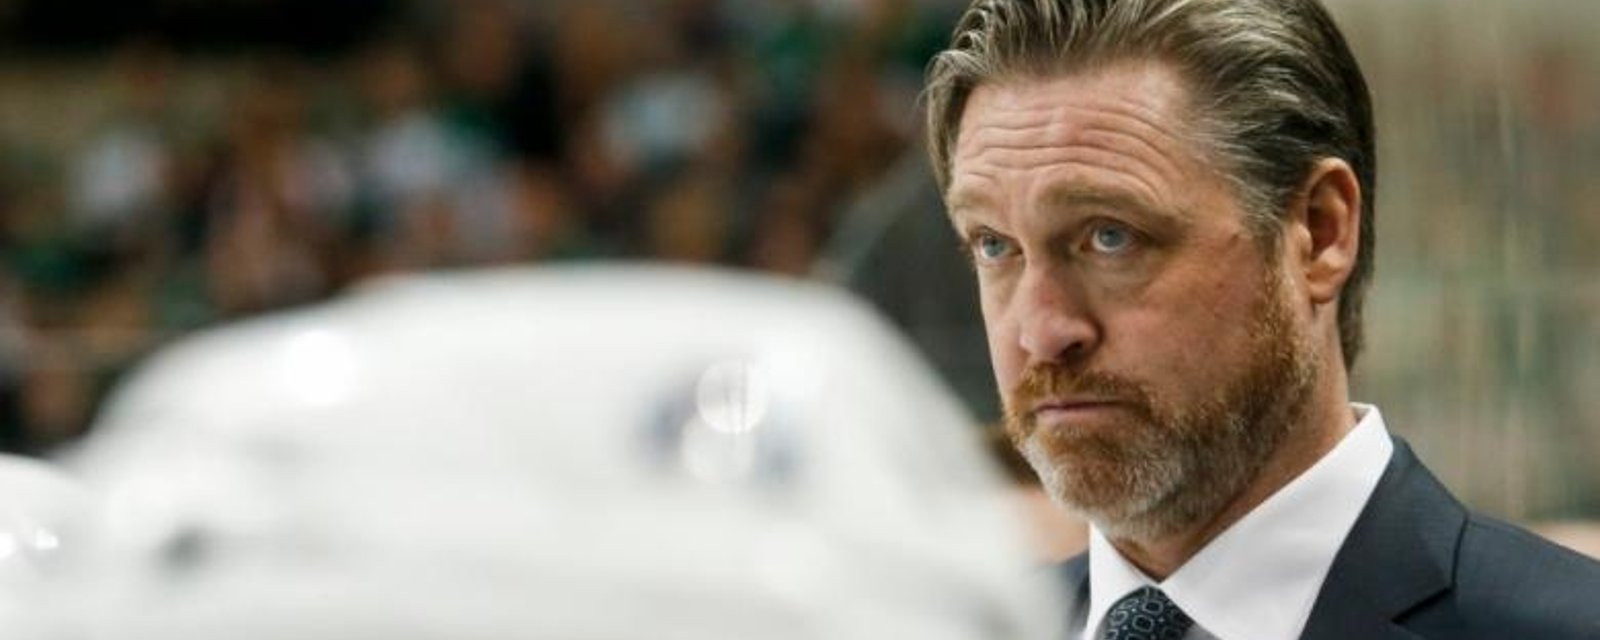 Patrick Roy reveals the reason why he quit on his team.